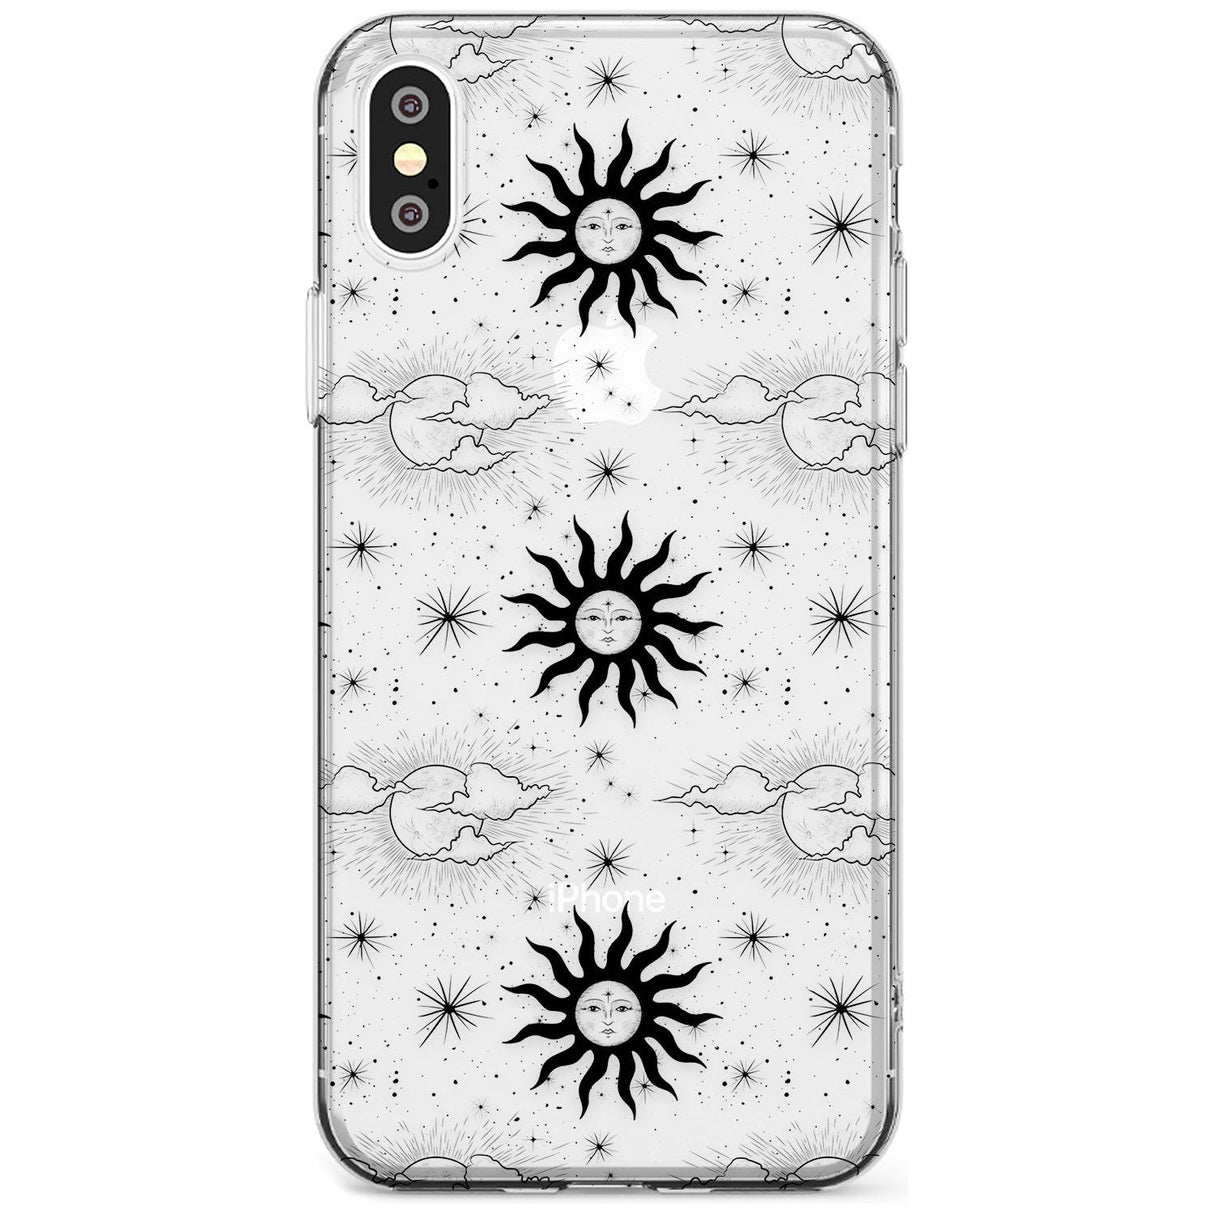 Suns & Clouds Vintage Astrological Slim TPU Phone Case Warehouse X XS Max XR